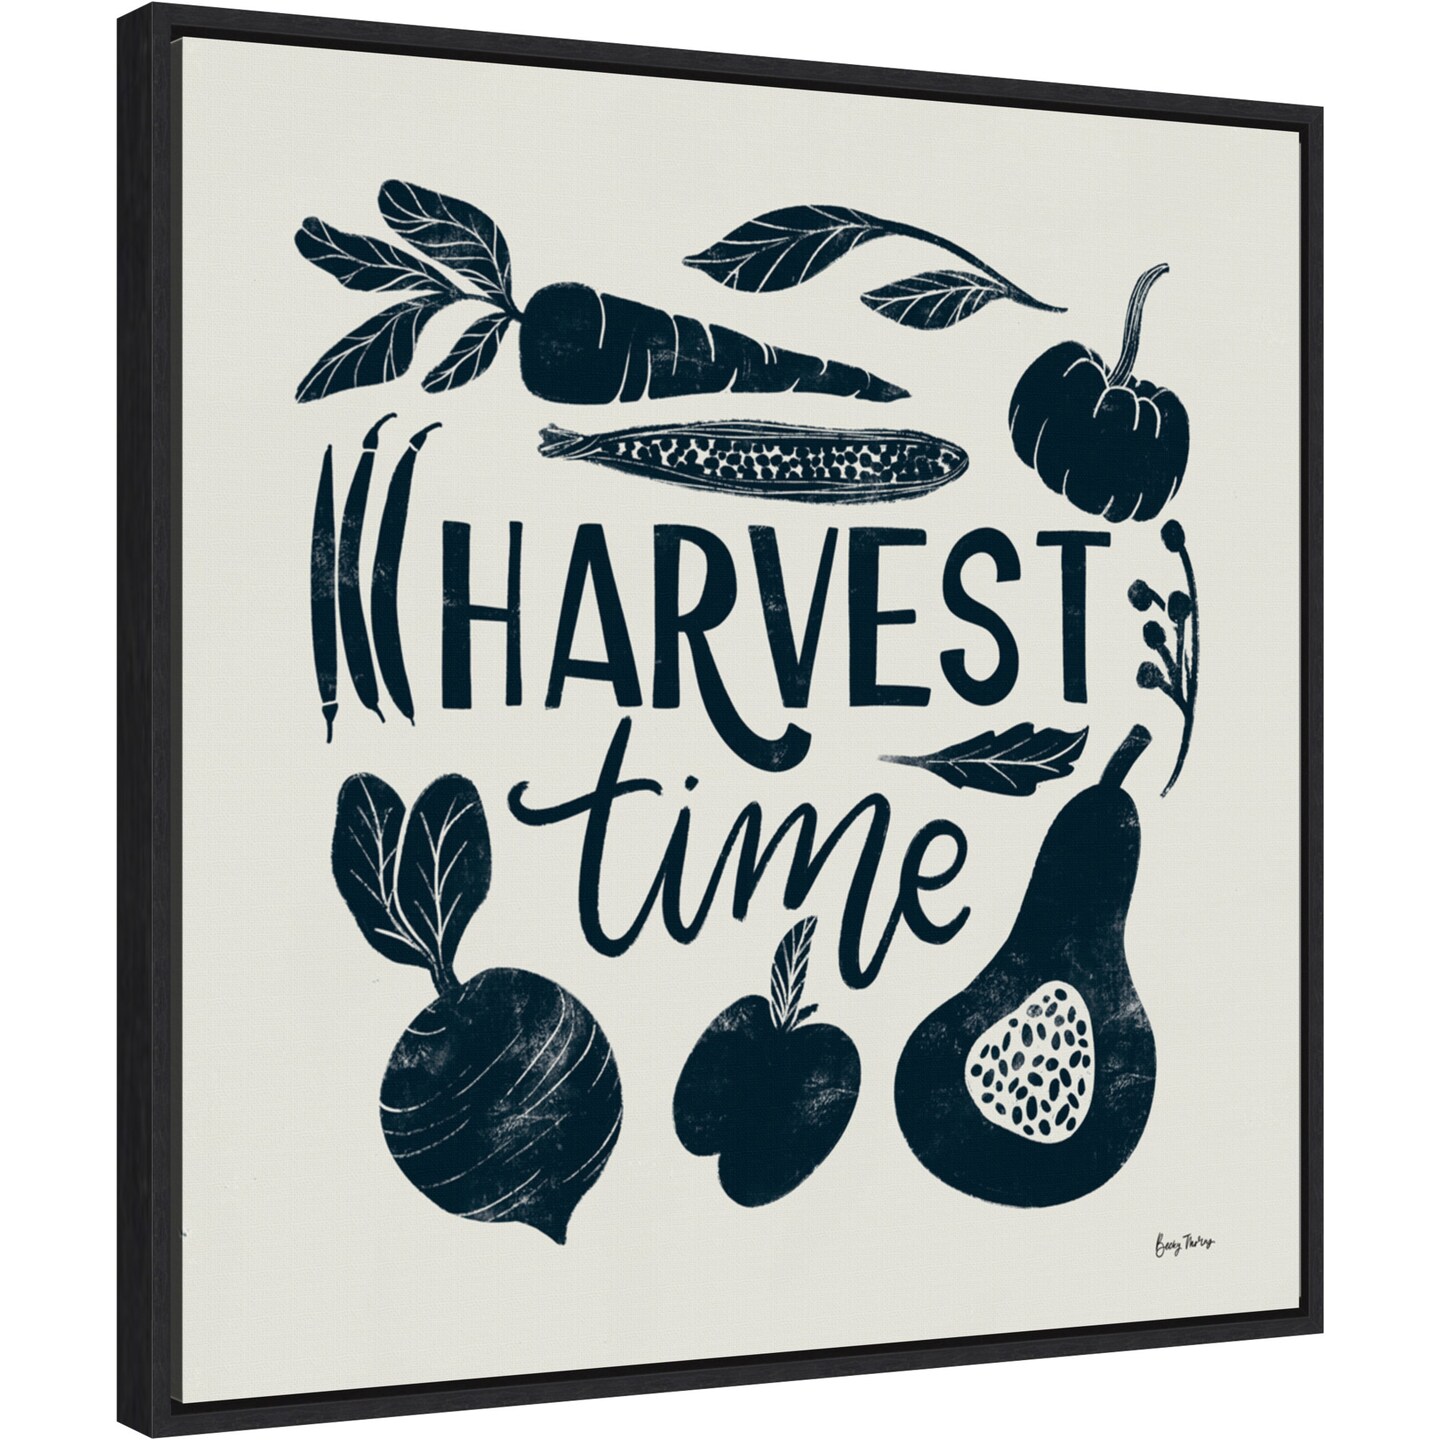 Harvest Lettering I Blue by Becky Thorns 22-in. W x 22-in. H. Canvas Wall Art Print Framed in Black